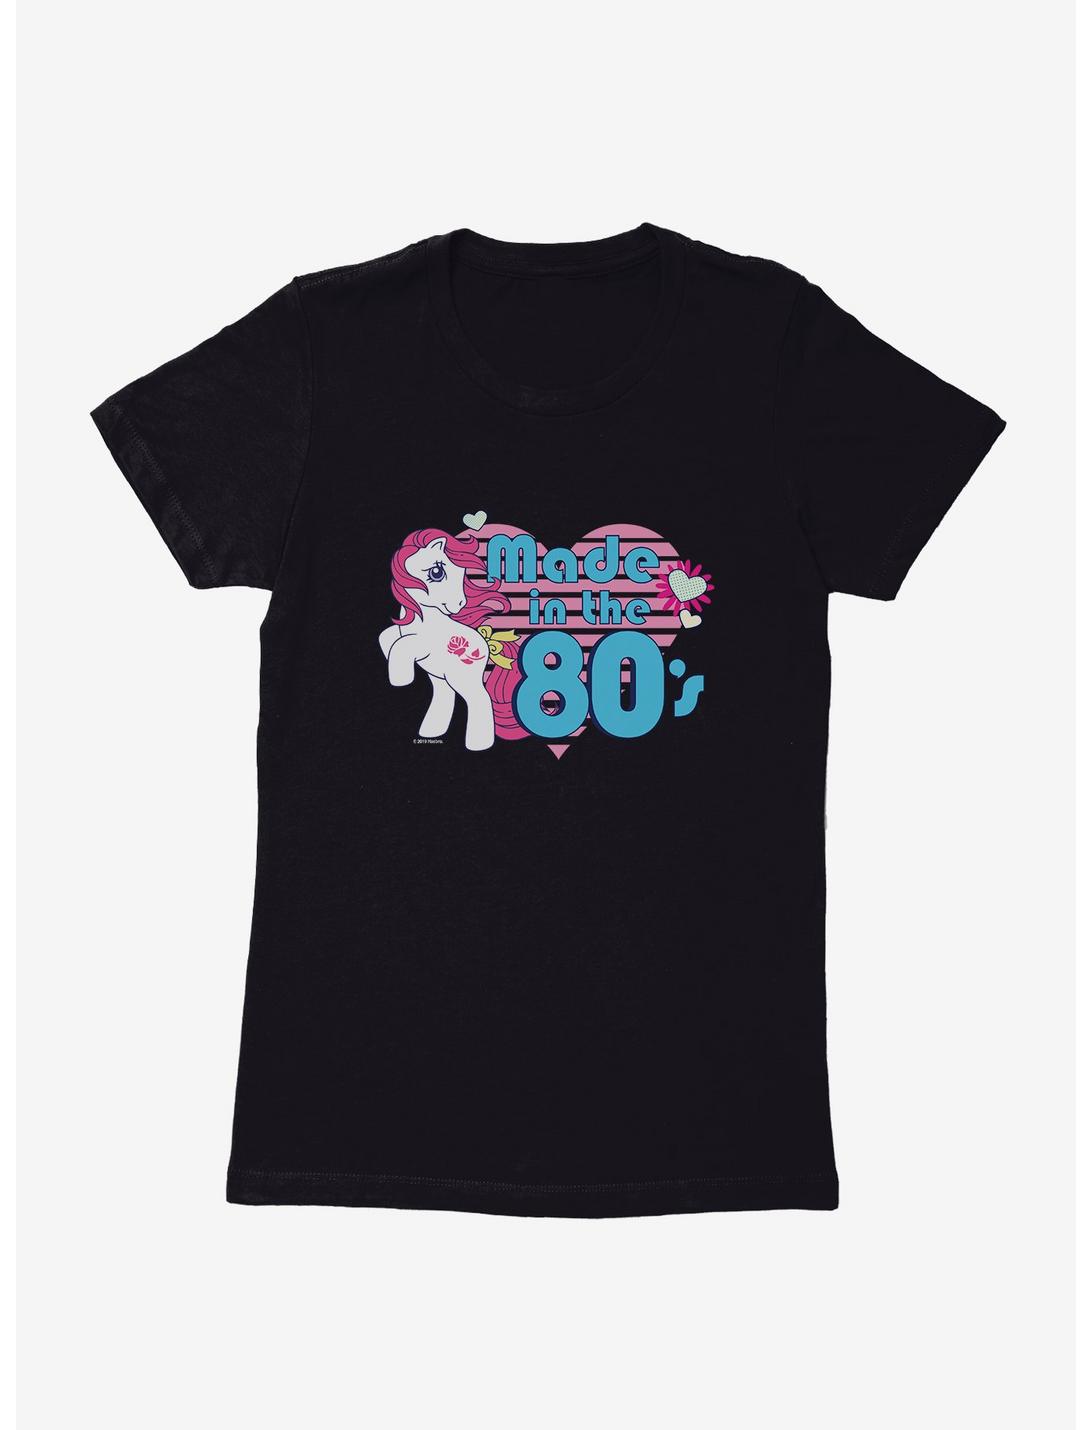 My Little Pony Made In The 80s Womens T-Shirt, , hi-res